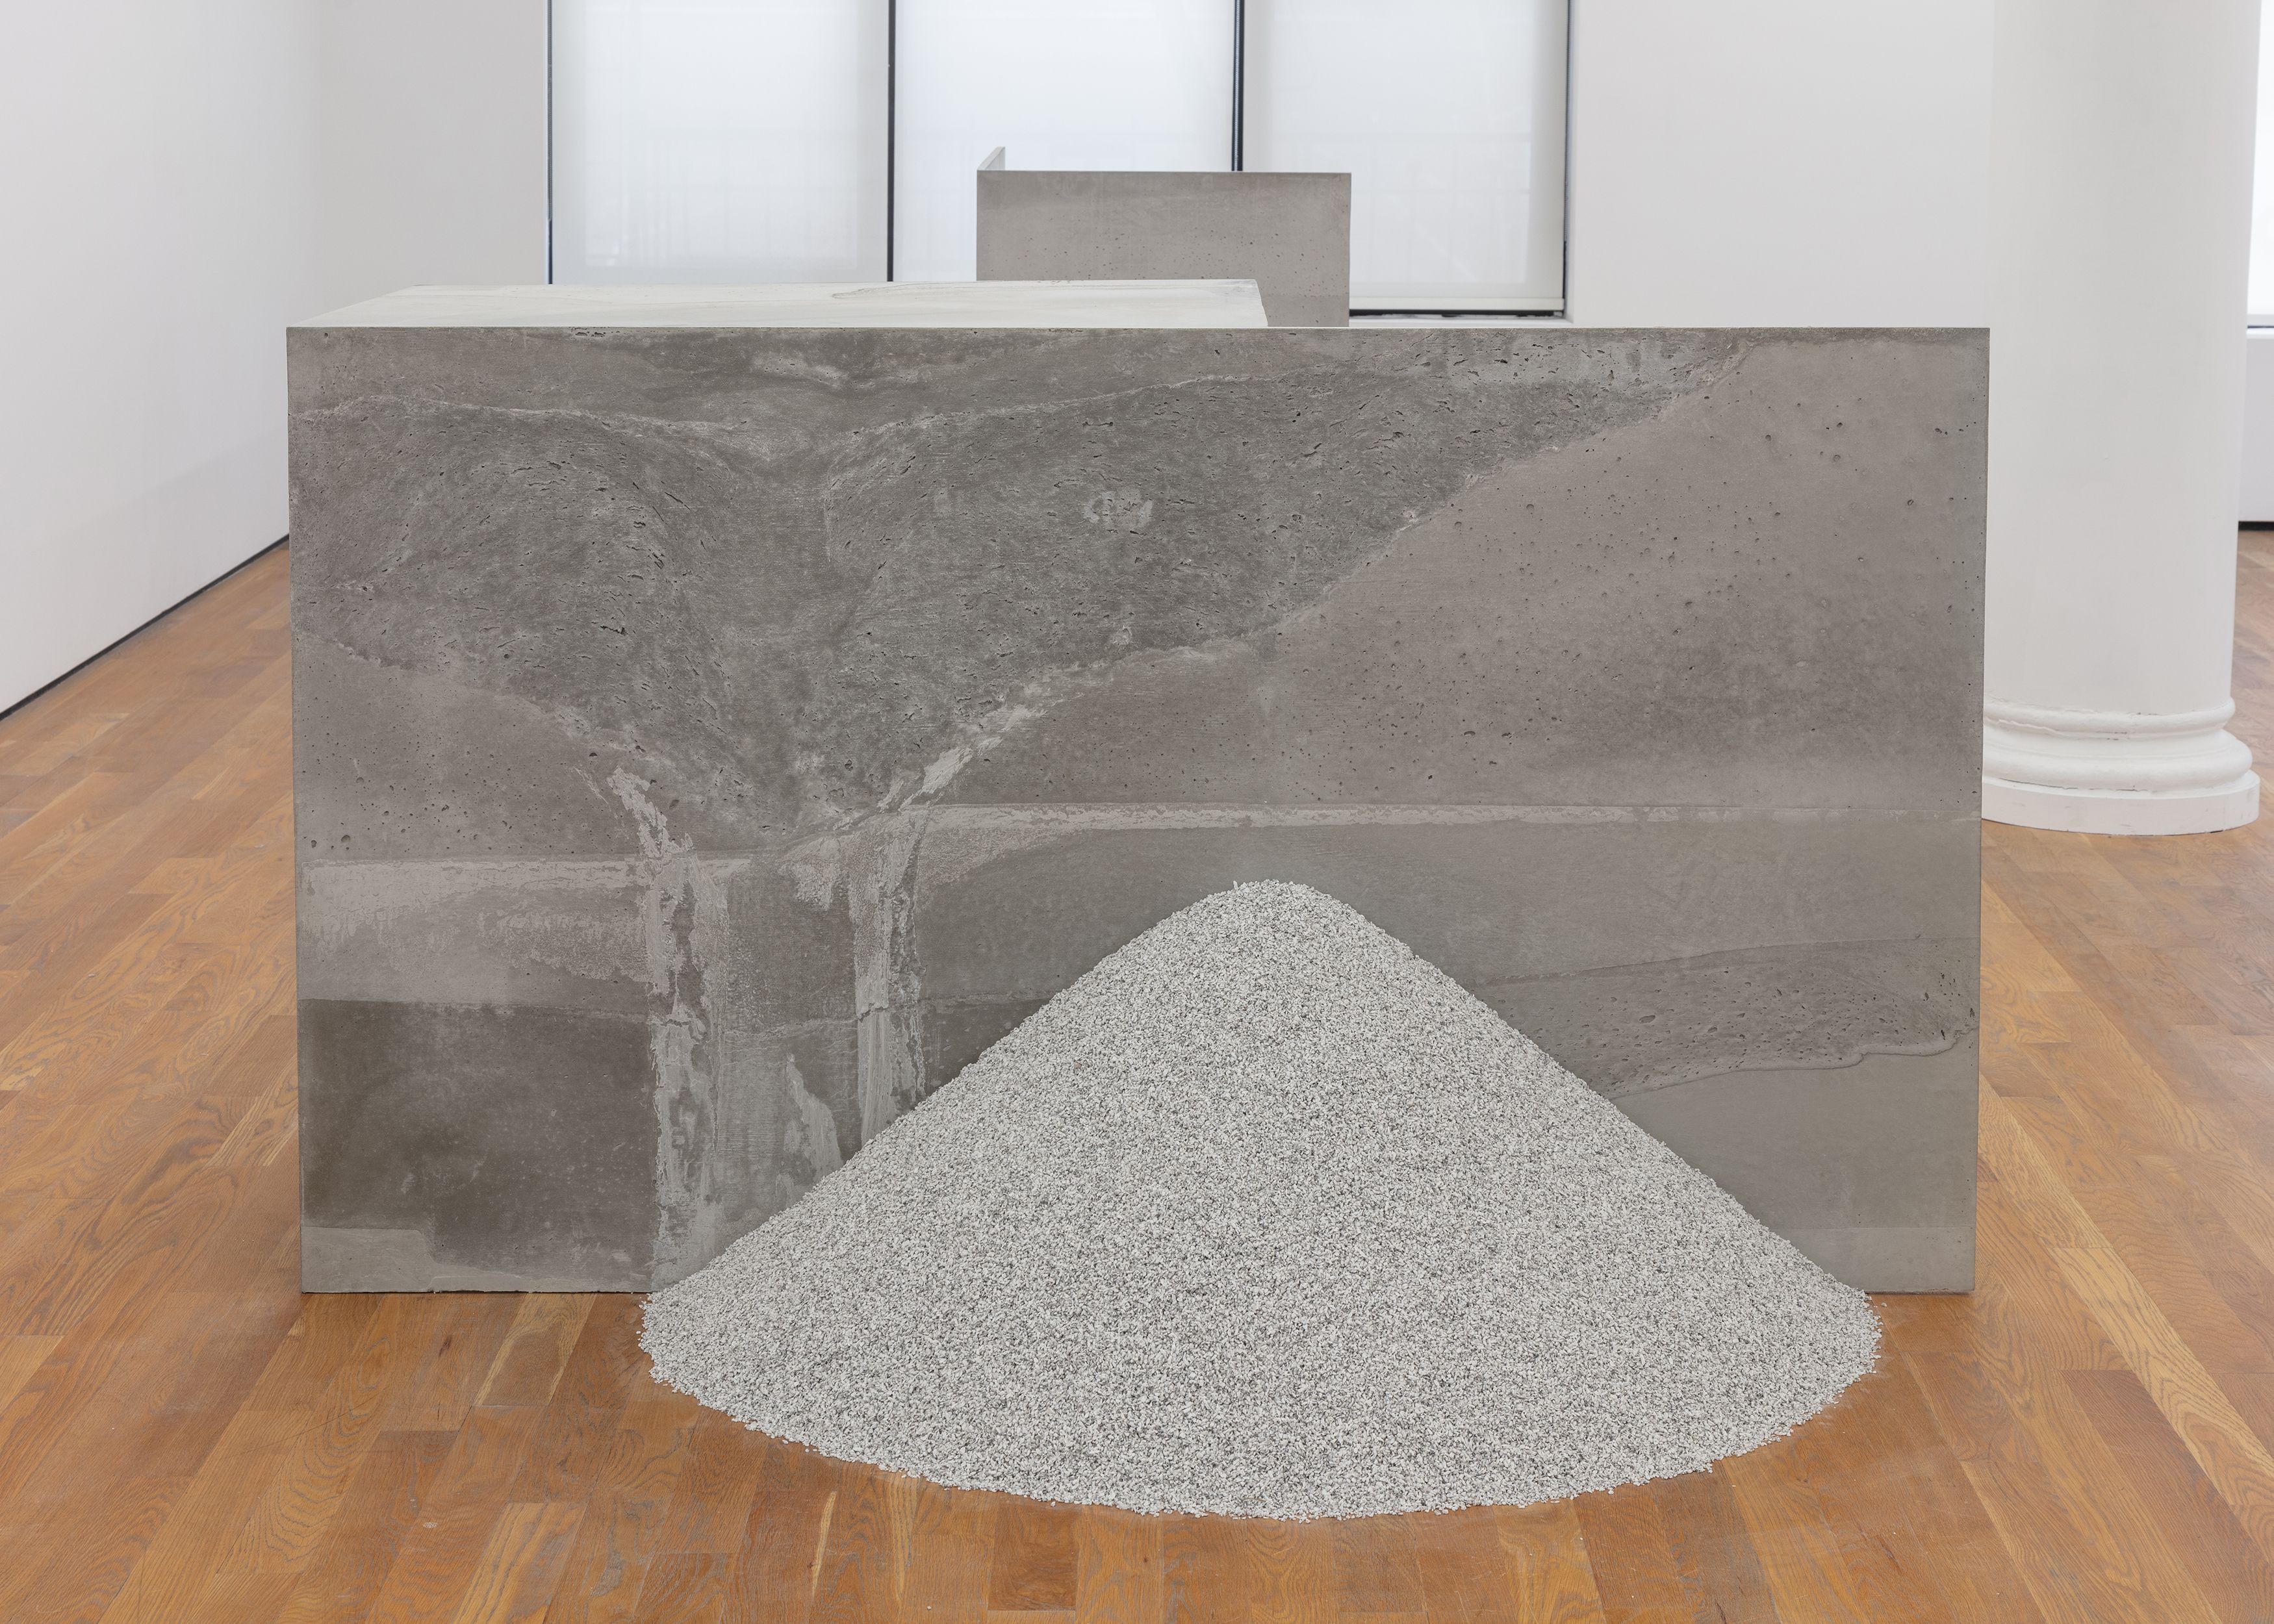 Stephen Lichty, Repose 2, 2021, concrete and crushed granite, 44 x 76 7/8 x 77 in. (111.76 x 195.26 cm)